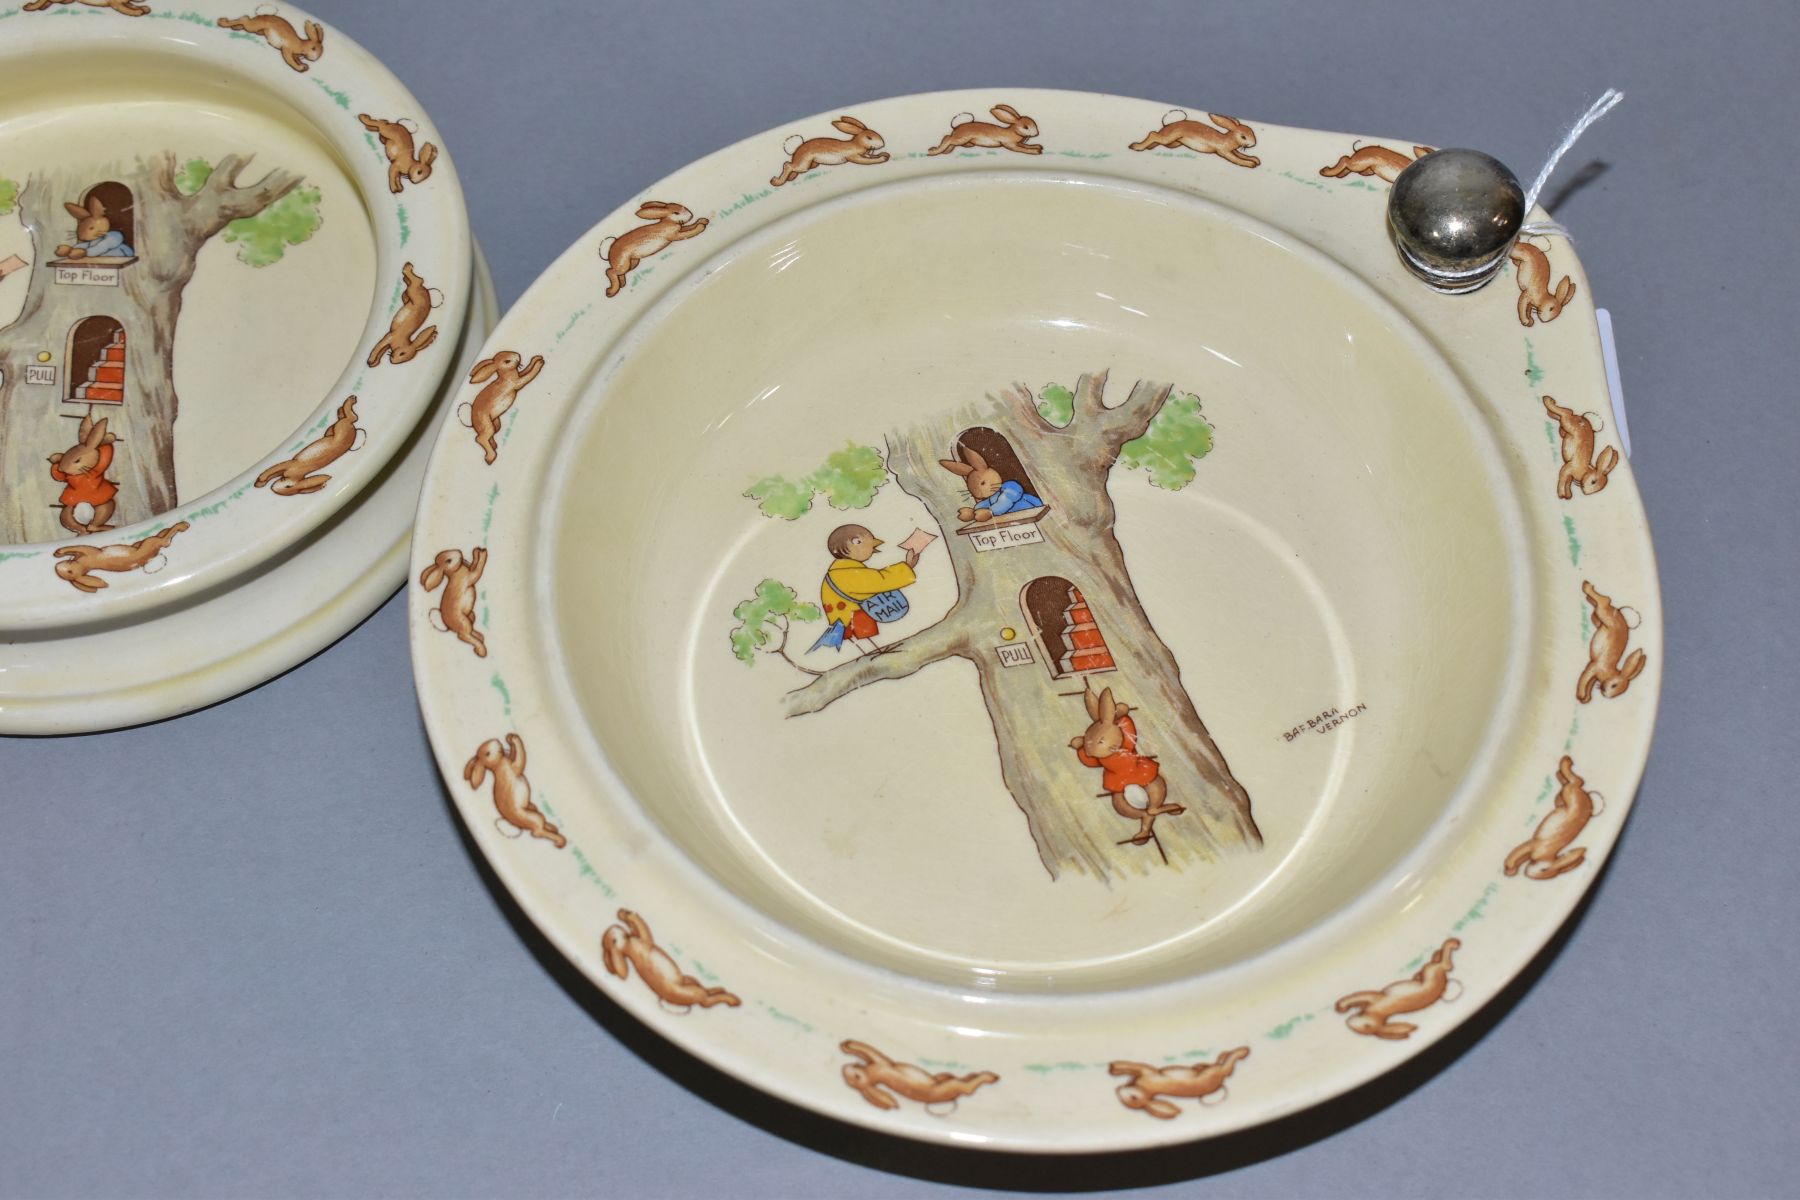 TWO PIECES OF ROYAL DOULTON BUNNYKINS EARTHENWARE TABLEWARES OF AIRMAIL DELIVERY SCENE LFa by - Image 2 of 7